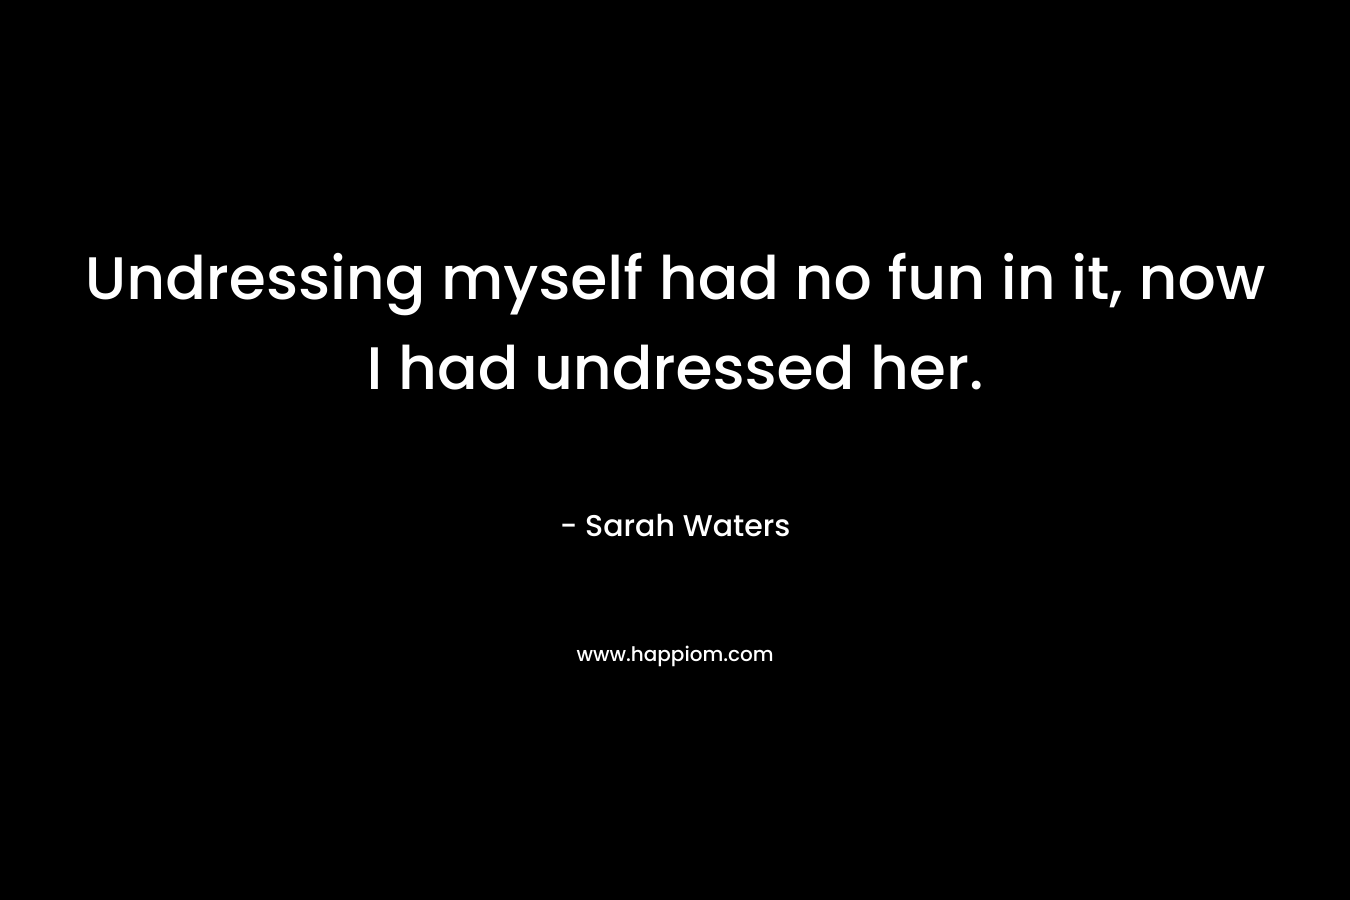 Undressing myself had no fun in it, now I had undressed her. – Sarah Waters